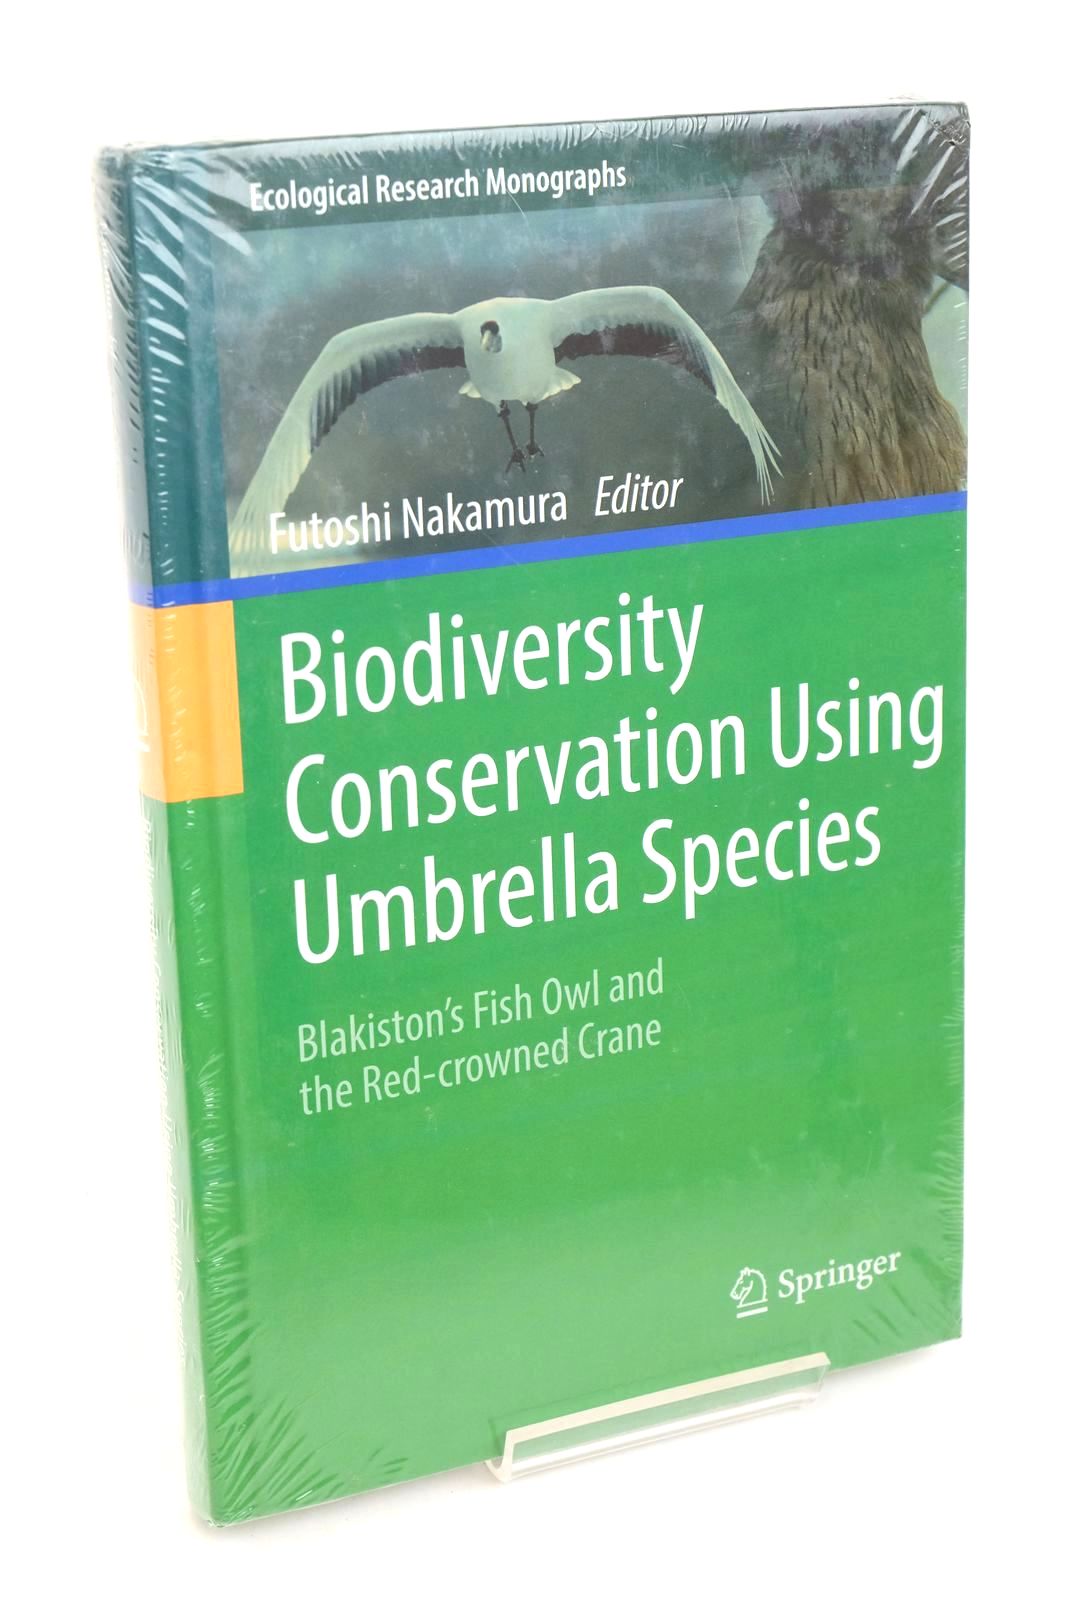 Photo of BIODIVERSITY CONSERVATION USING UMBRELLA SPECIES written by Nakamura, Futoshi published by Springer (STOCK CODE: 1323003)  for sale by Stella & Rose's Books